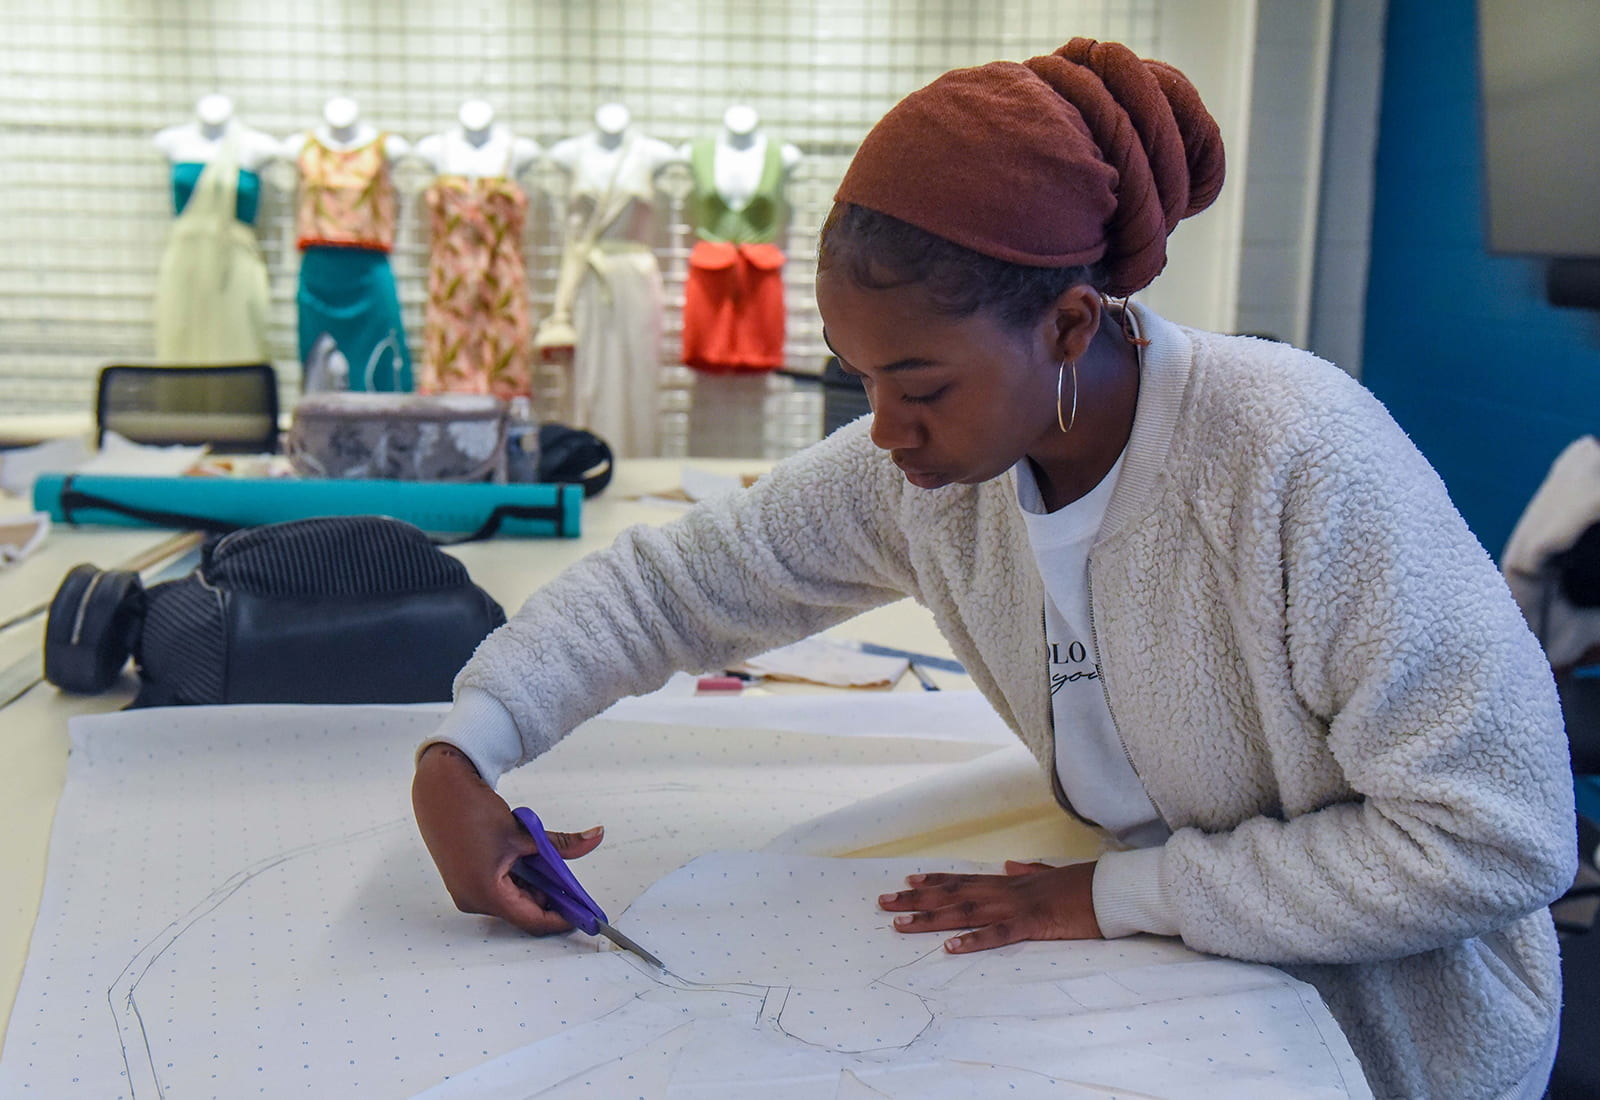 A student cutting out a clothing pattern outline